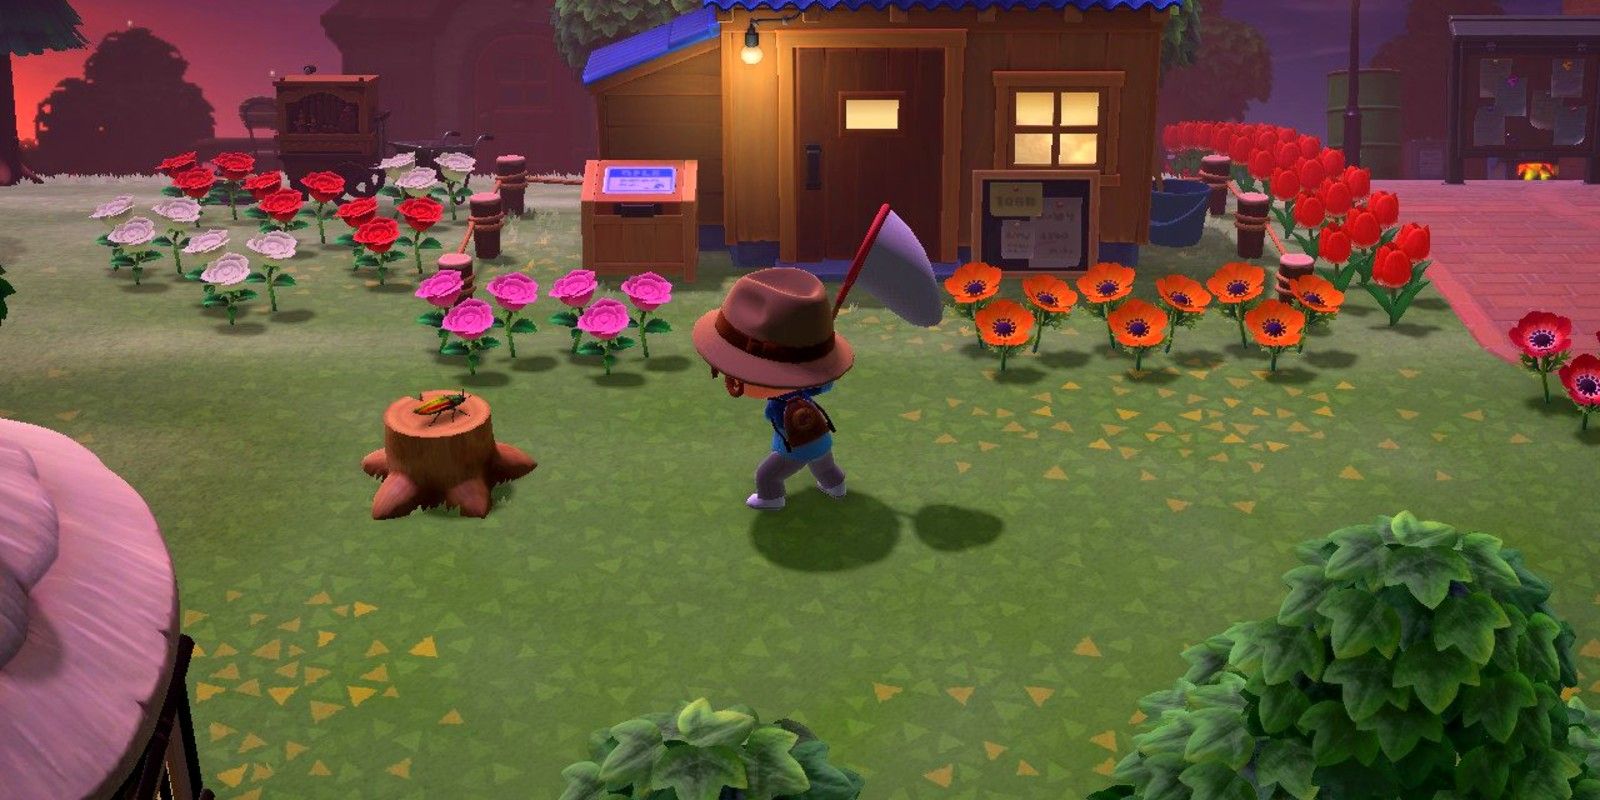 A player swings his net at a beetle sitting on a log outside his house in Animal Crossing: New Horizons